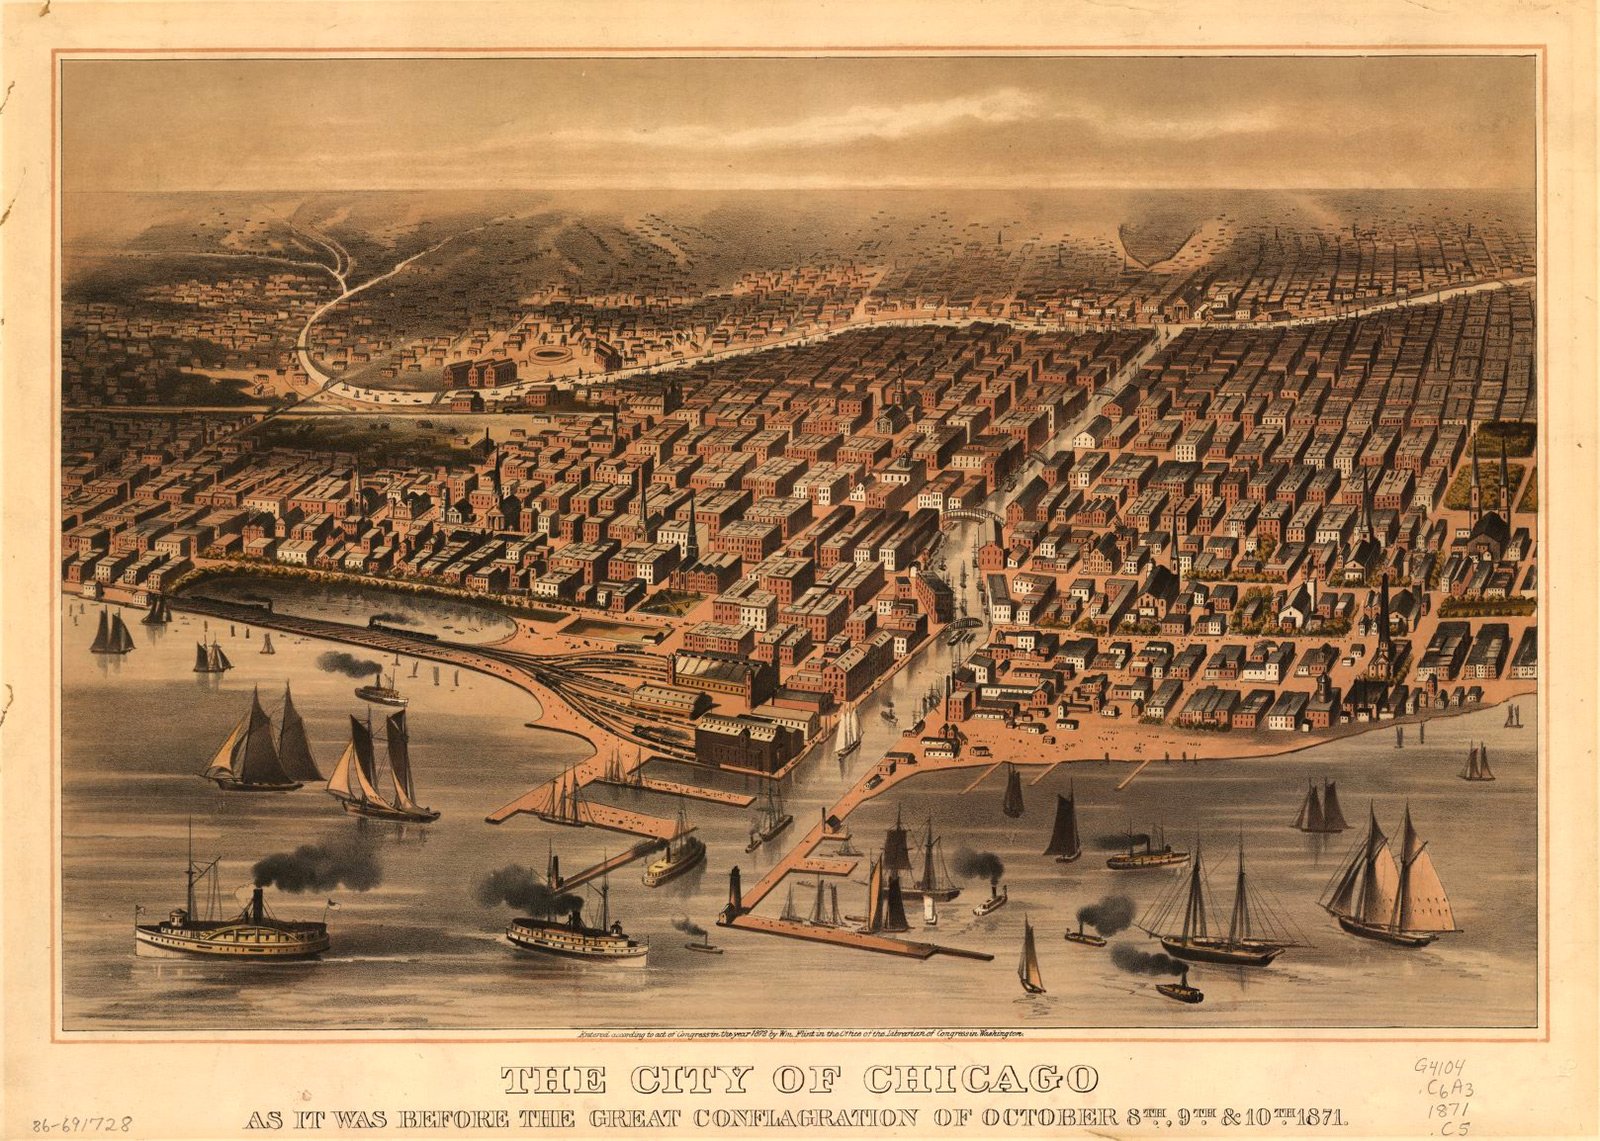 View of Chicago before Fire of 1871